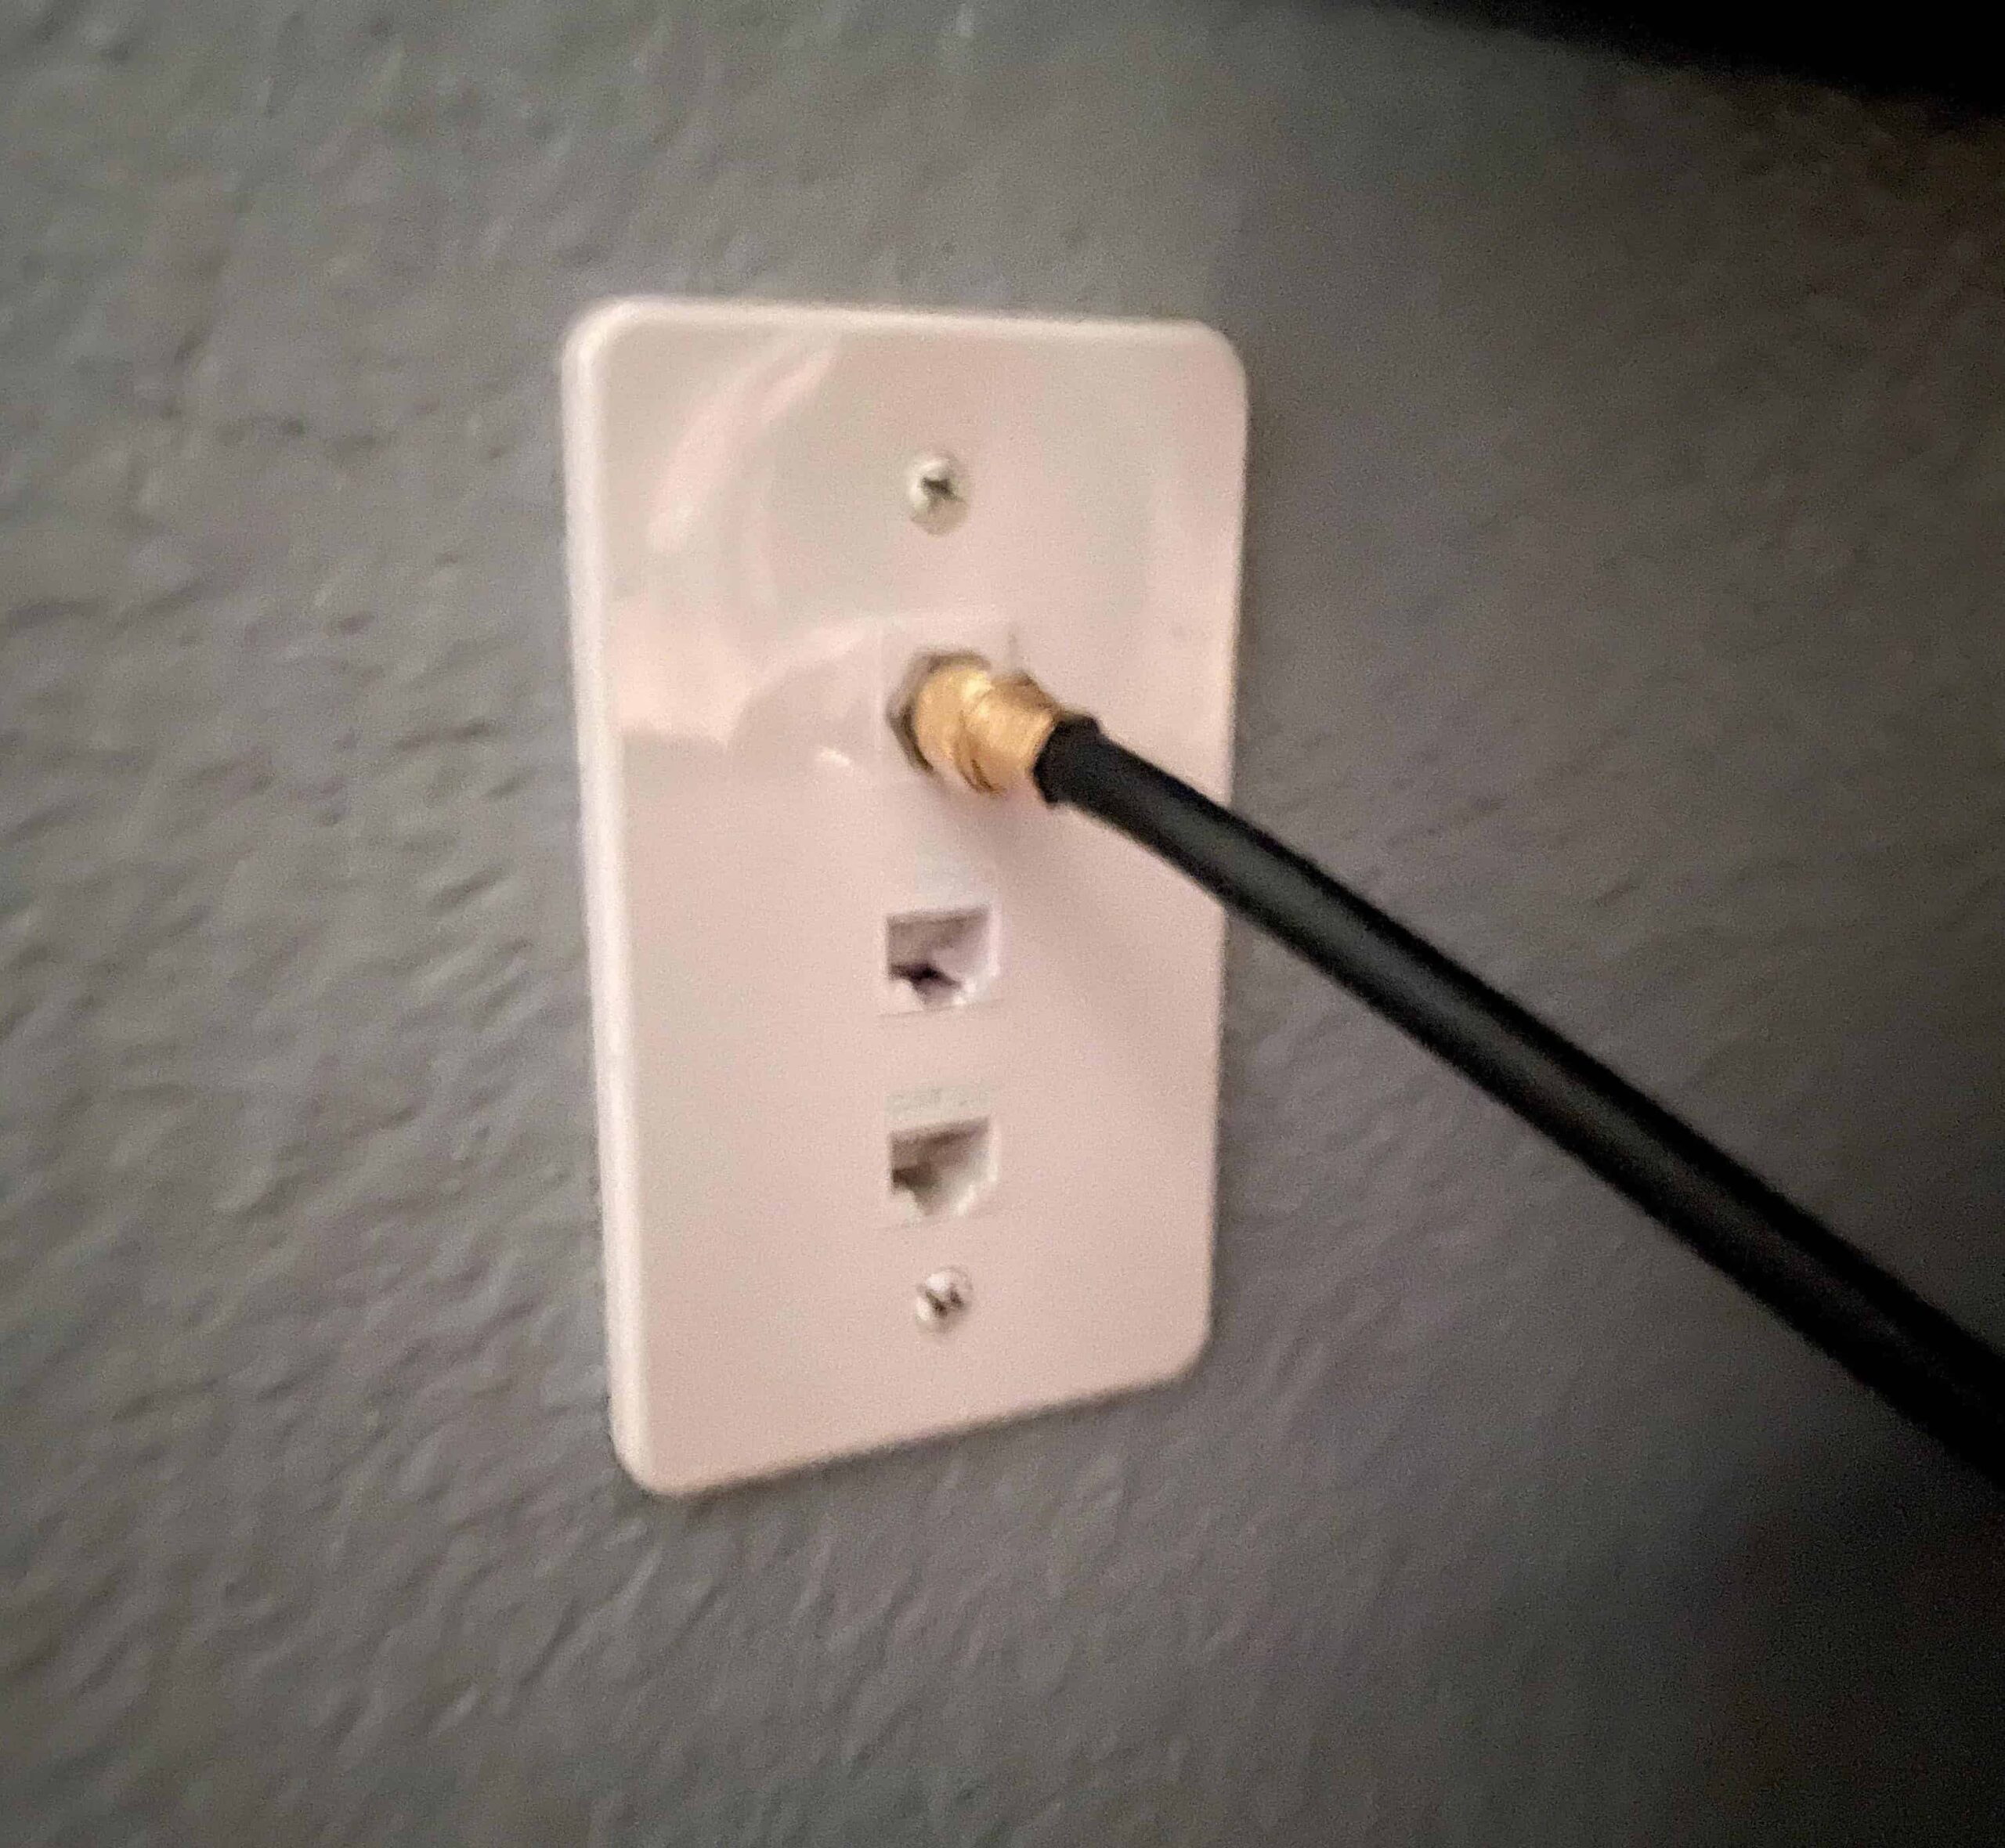 Coax wall outlet